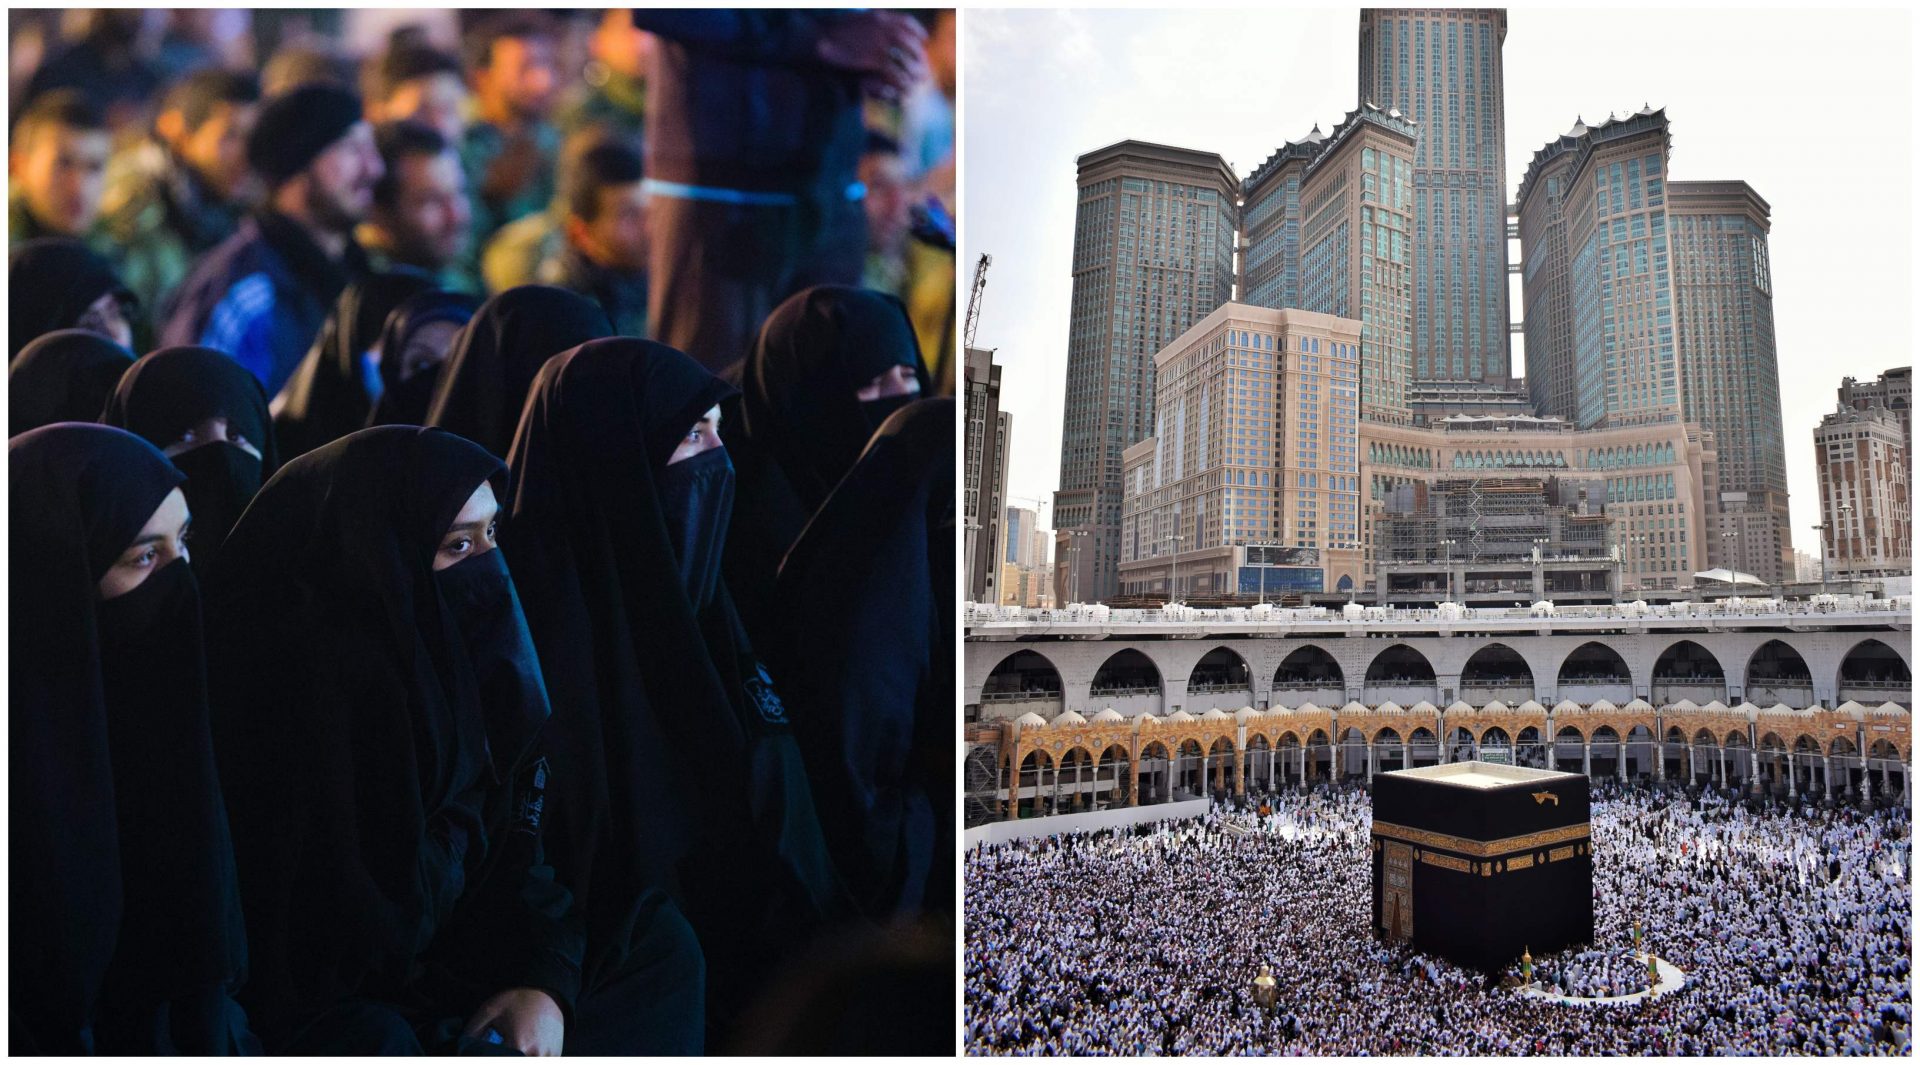 Women now can perform Hajj without a mahram